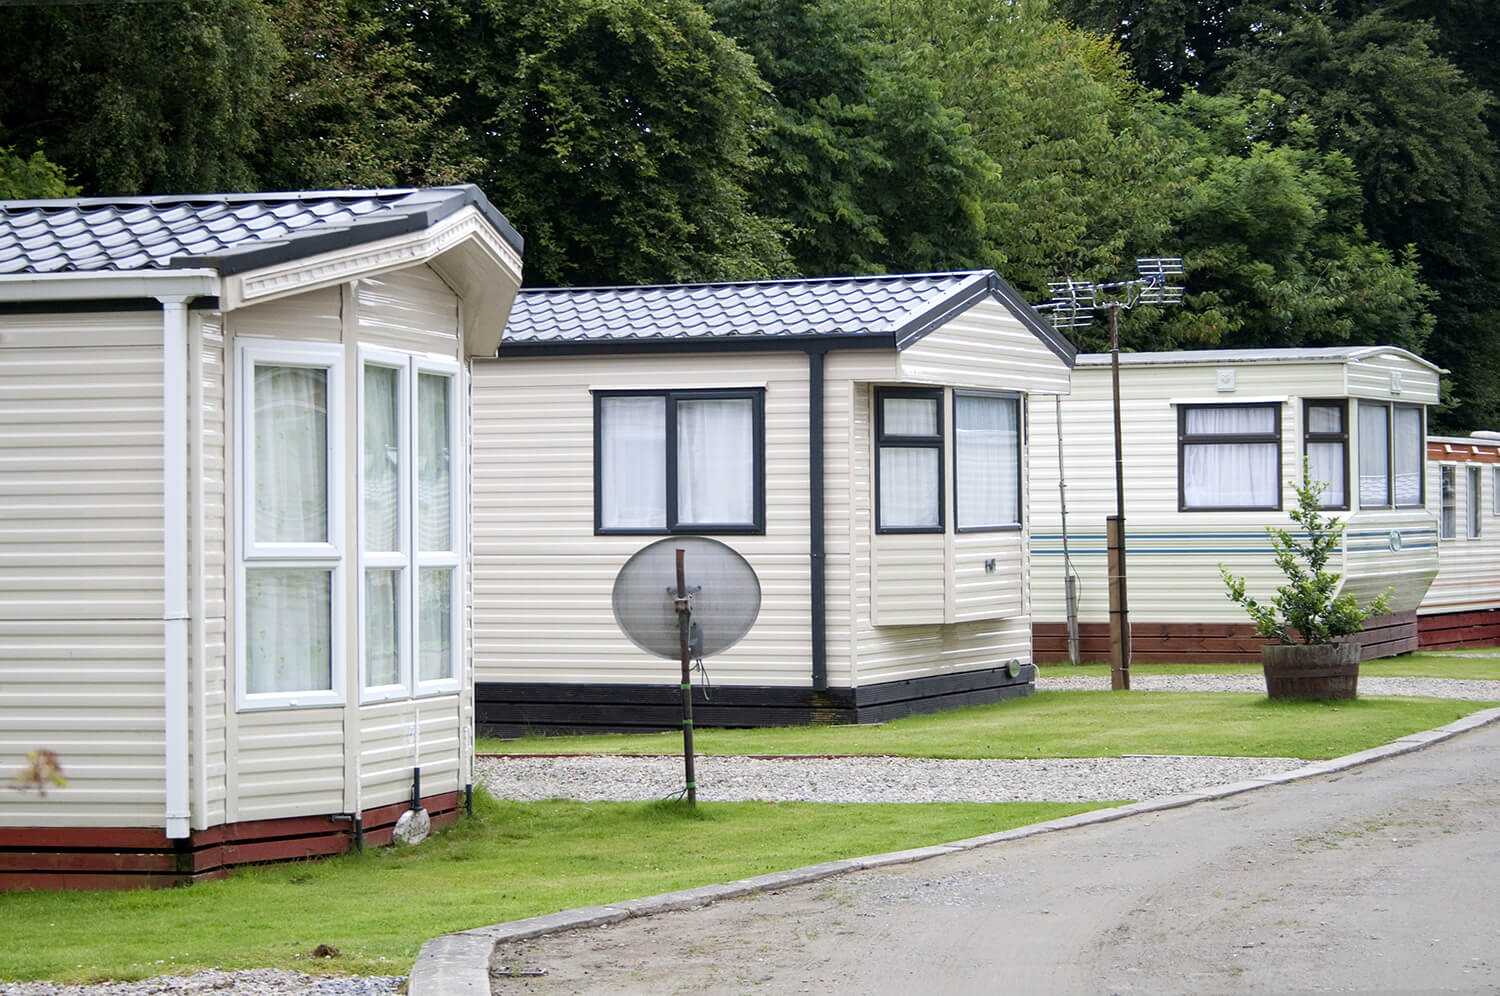 North Carolina Mobile Home Insurance Rates to Rise 15%, Starting in October